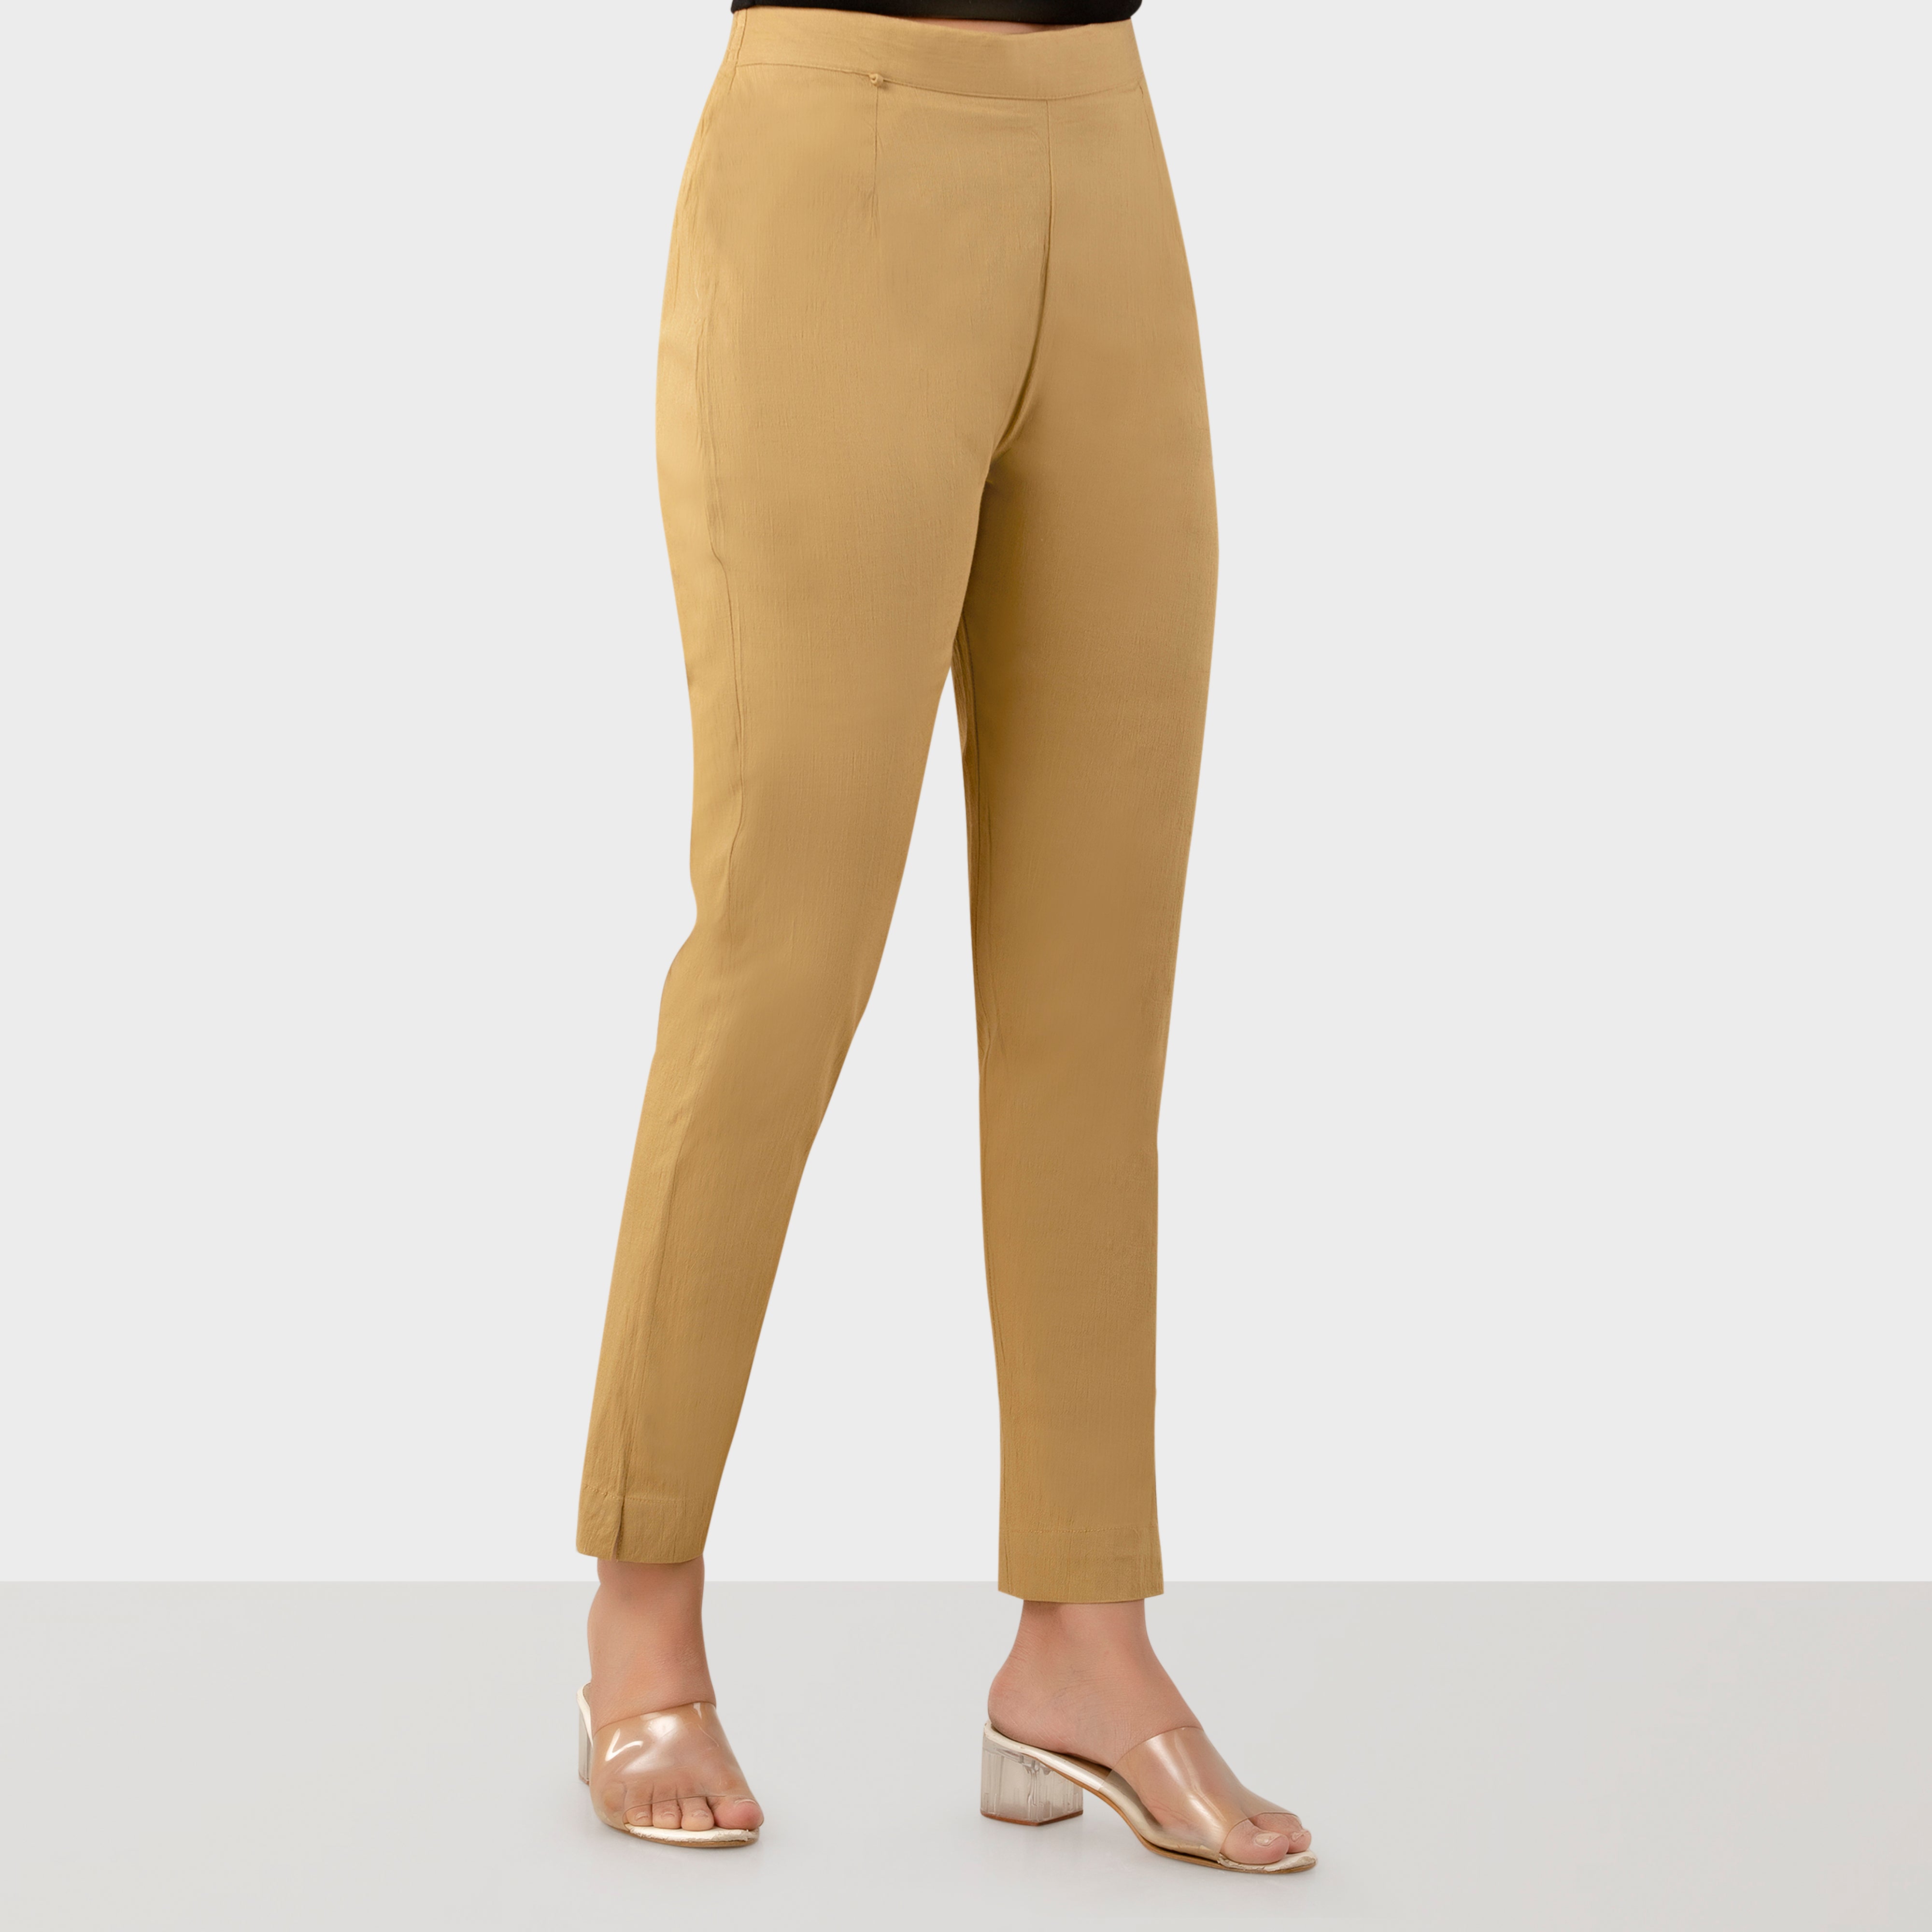 Regular Fit Women Chocolate Stretchable Pants